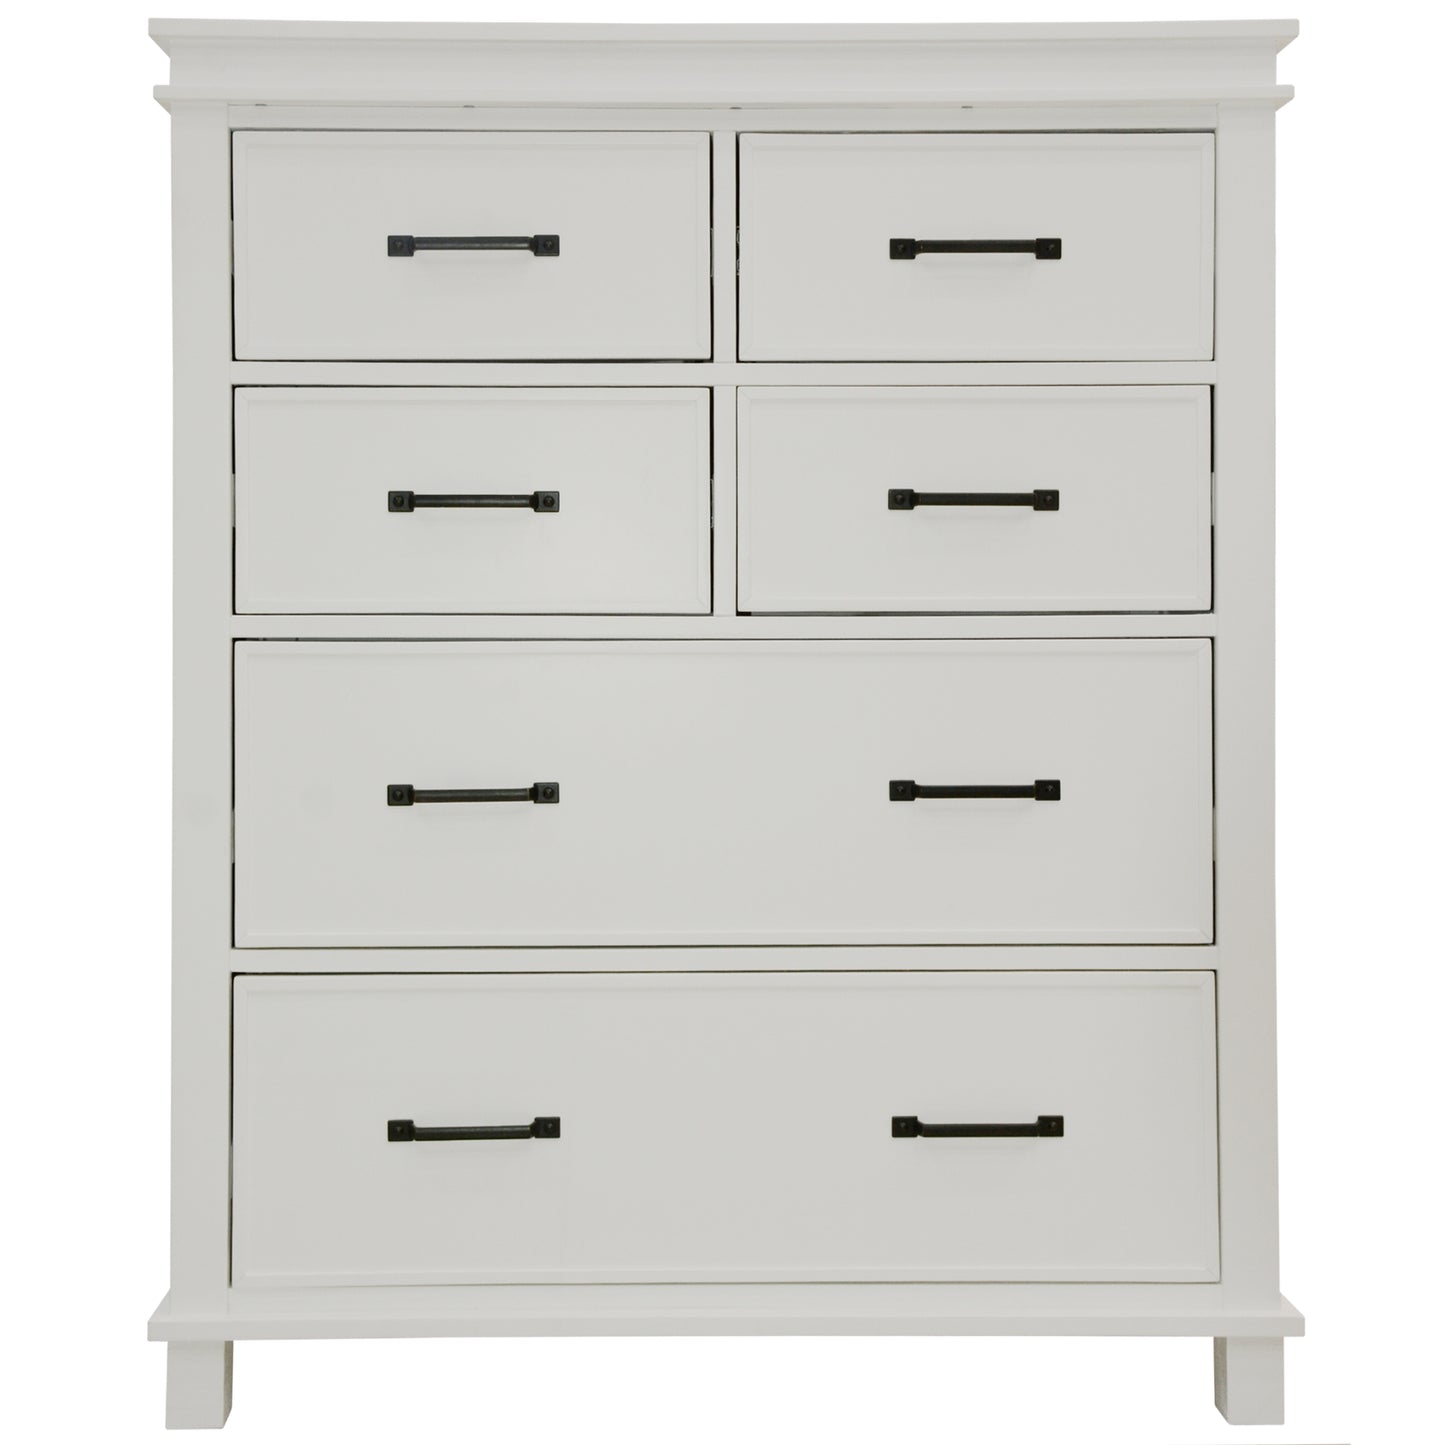 Lily Tallboy 6 Chest of Drawers Solid Pine Wood Bed Storage Cabinet - White